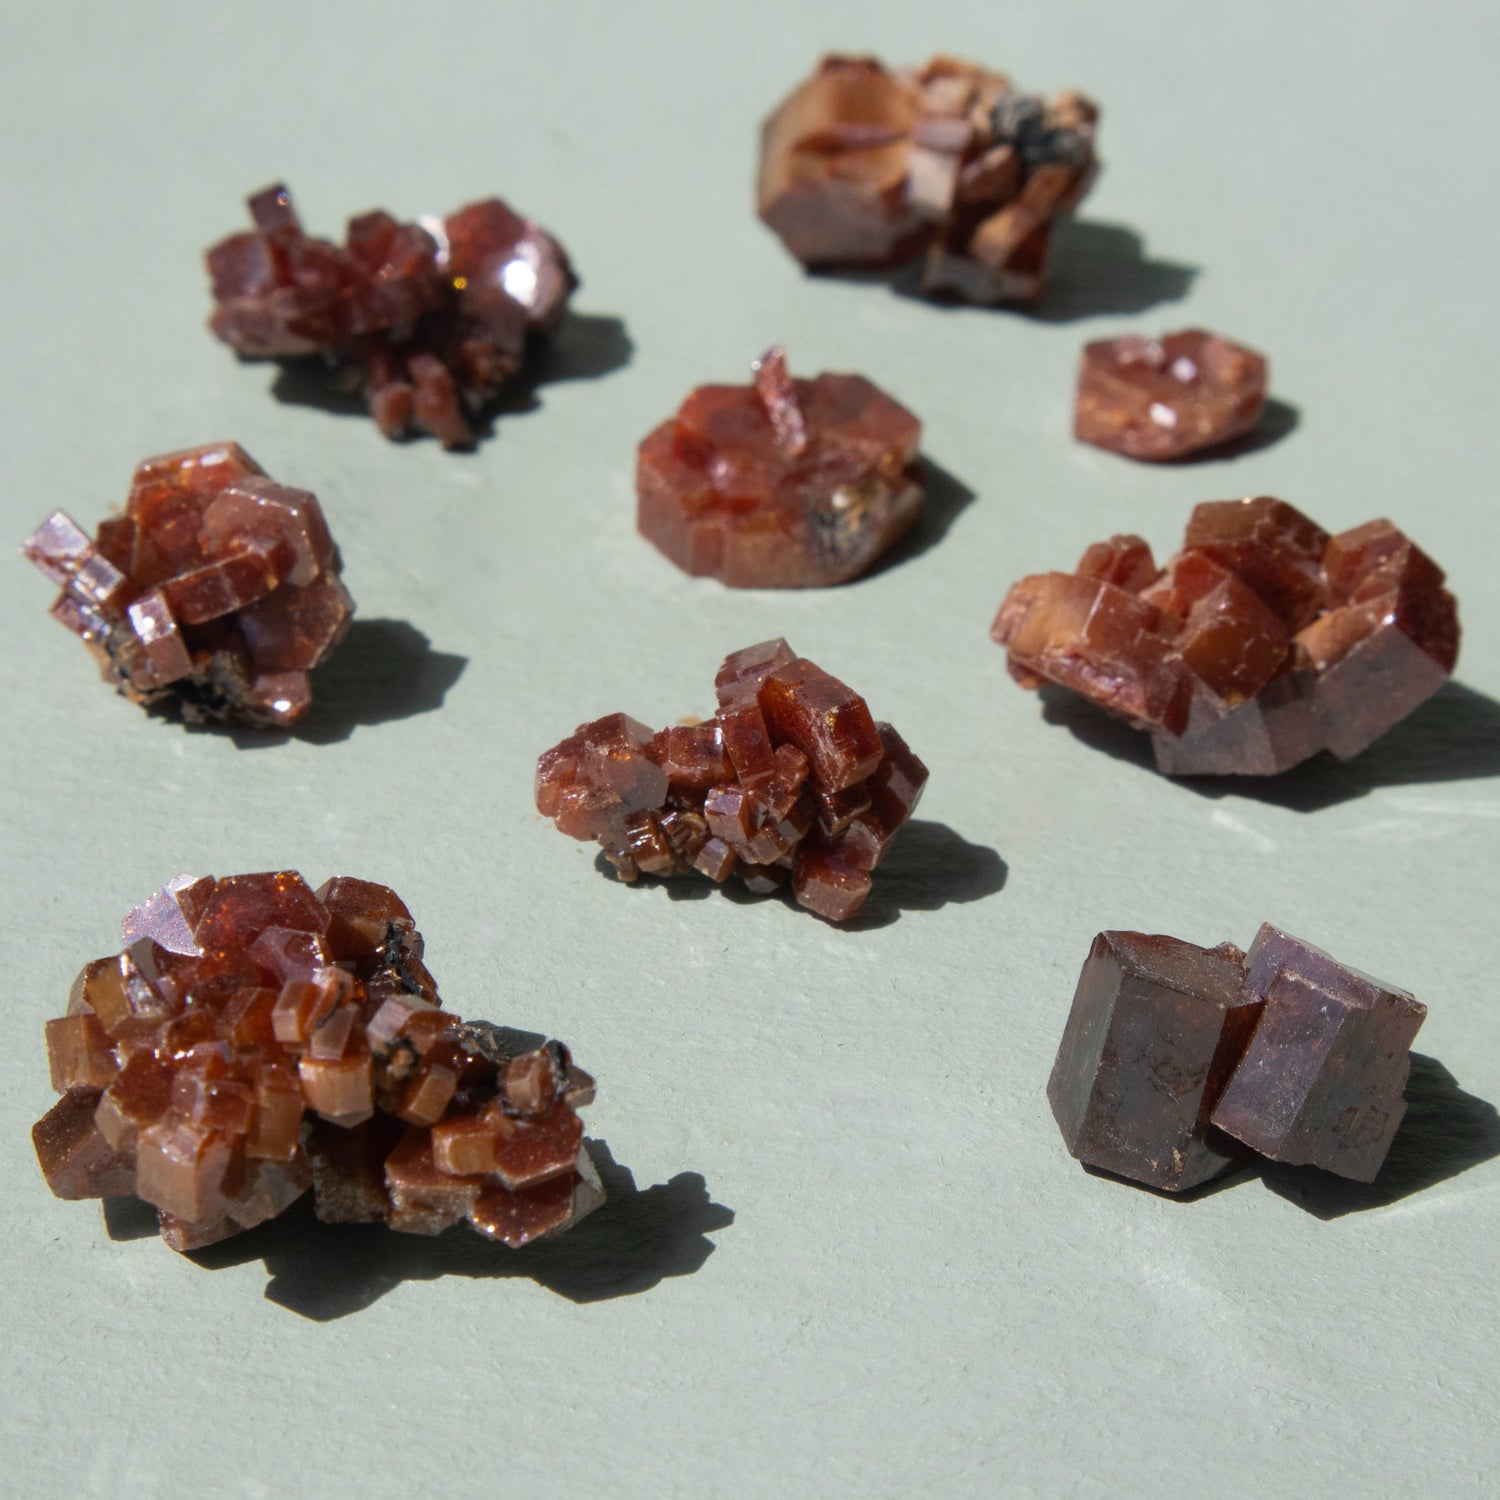 vanadinite, aa grade vanadinite, aa grade vanadinite specimen, vanadinite specimen, crystal specimen, gemstone specimen, vanadinite crystal, vanadinite stone, vanadinite properties, vanadinite healing properties, vanadinite metaphysical properties, vanadinite meaning